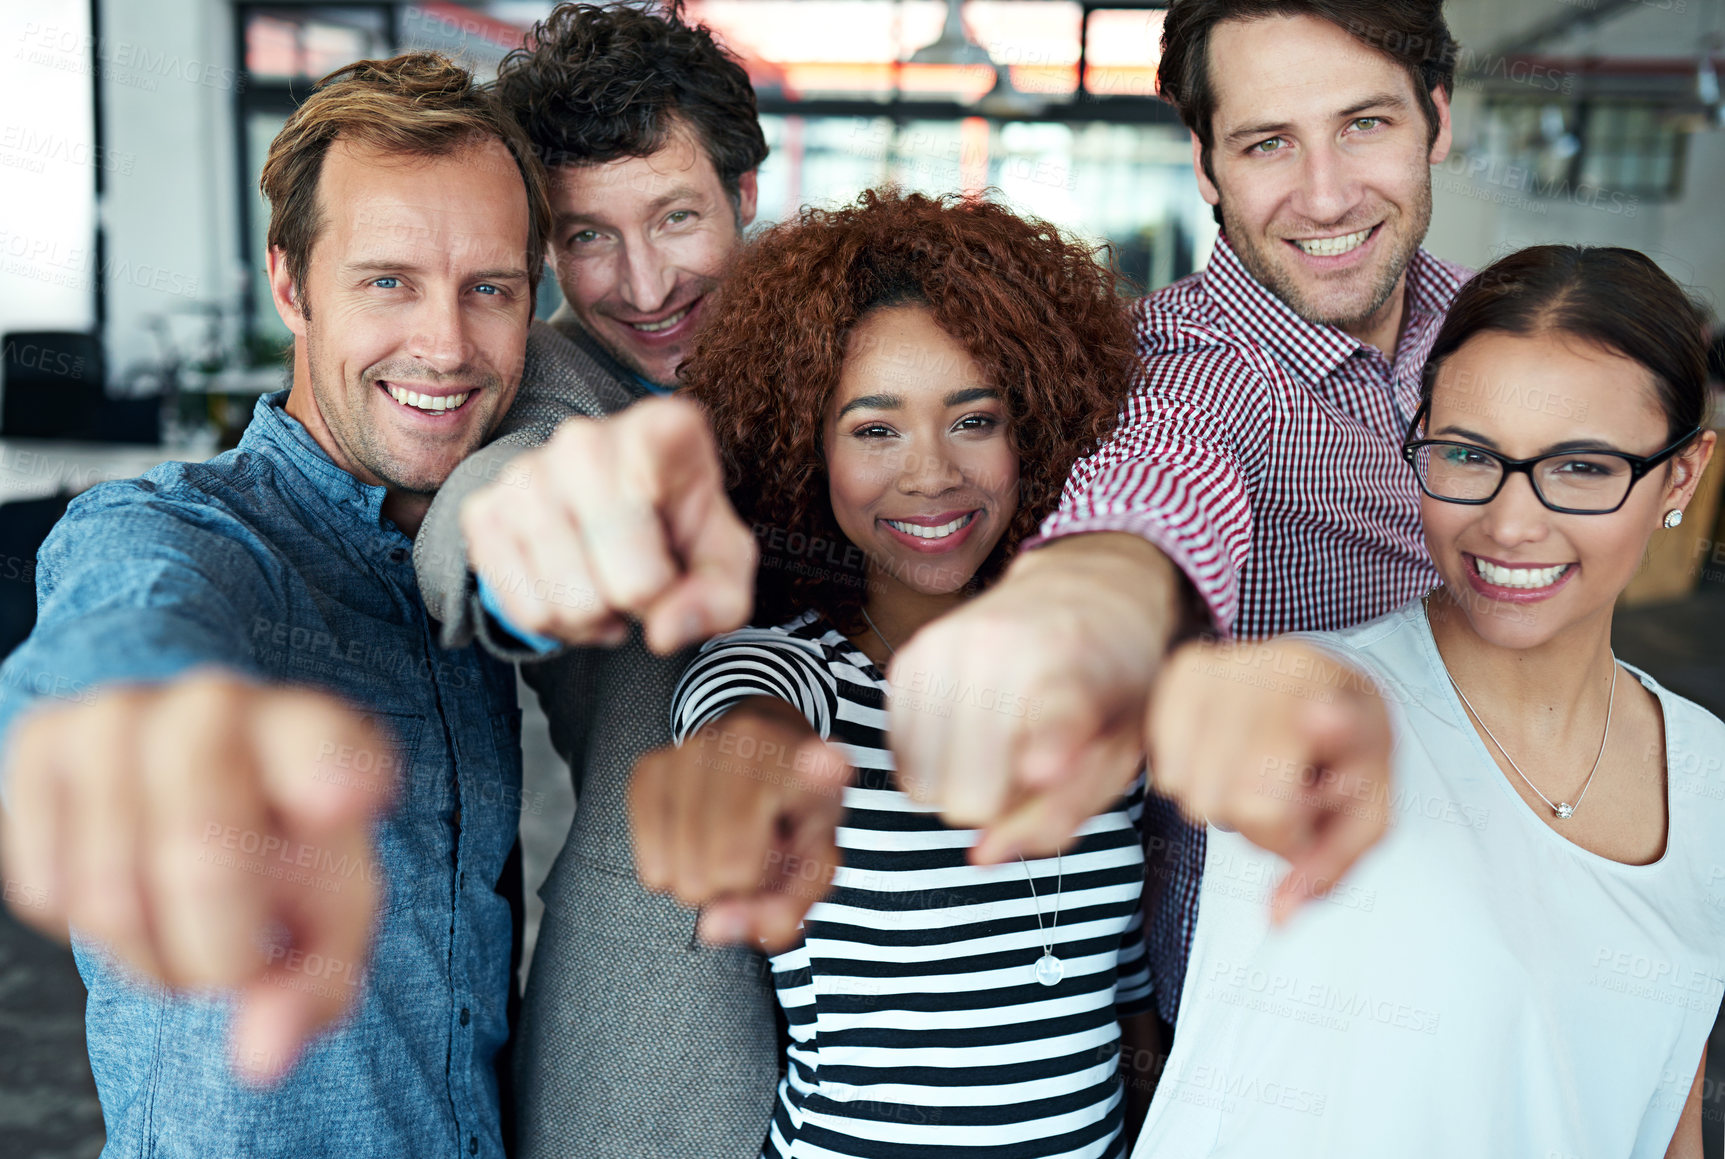 Buy stock photo Portrait of a group of office colleagues pointing at the camera